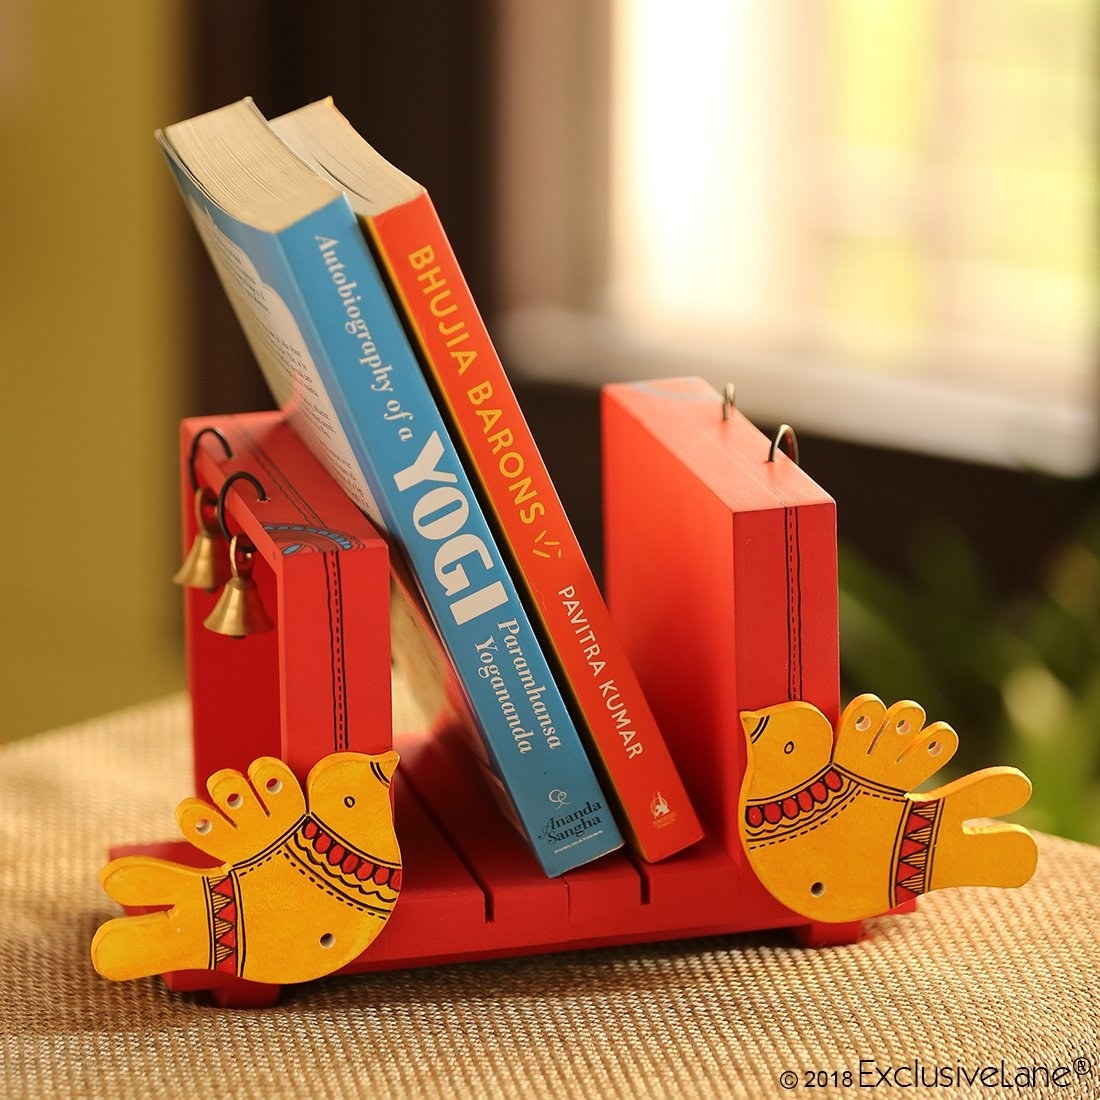 Bookends with birds on them and two books in the center